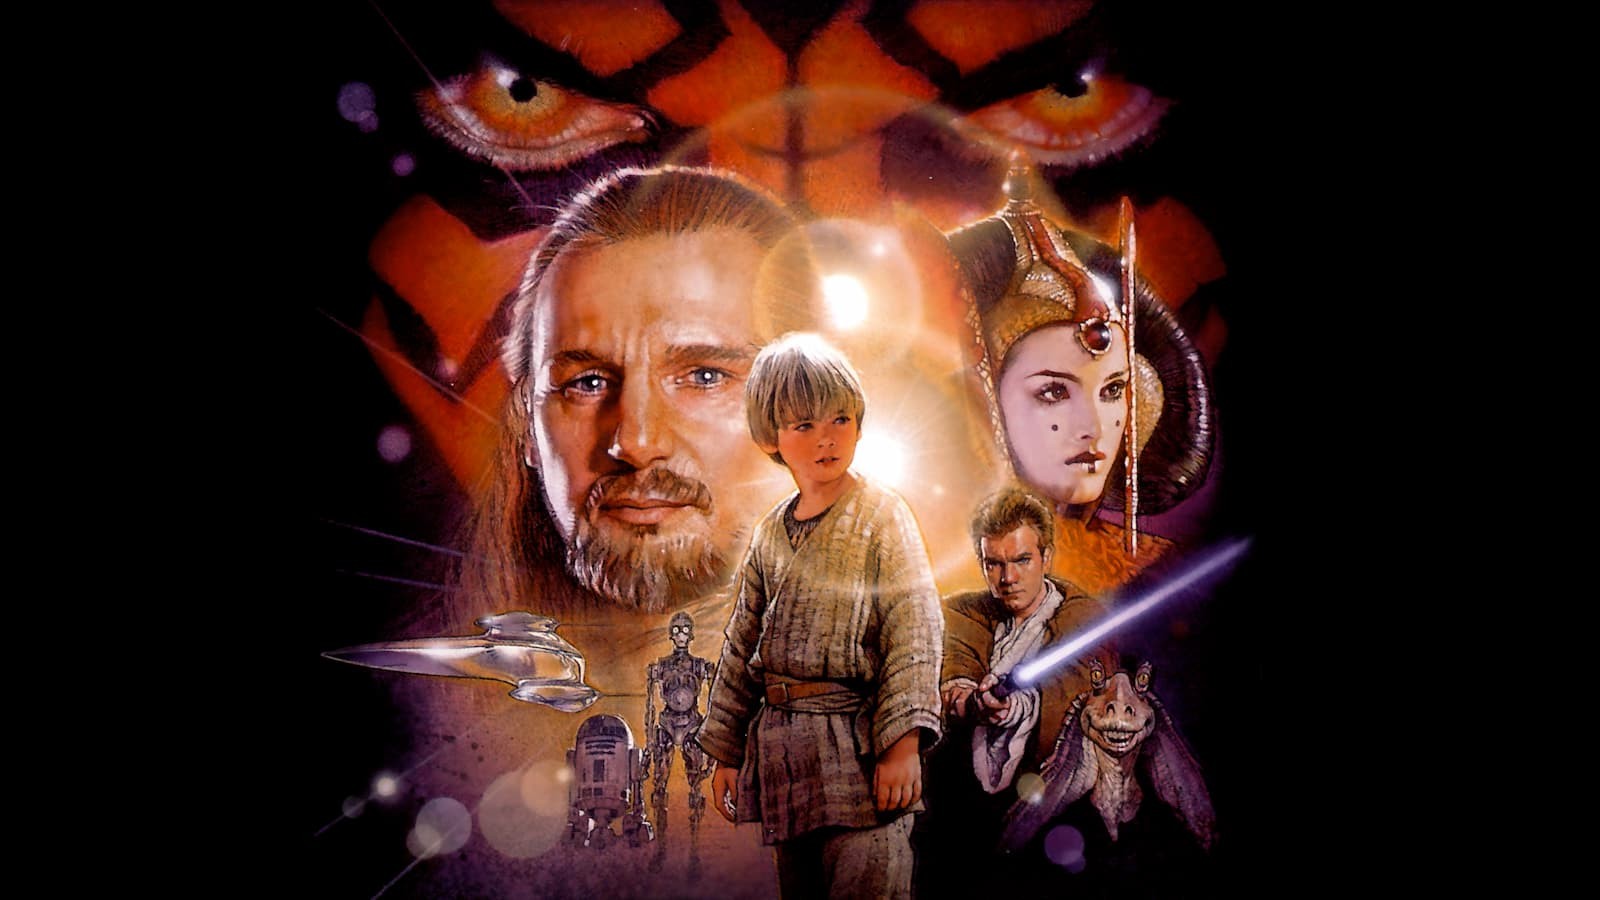 Star Wars: Episode 1 - The Phantom Menace is an adaptation of the film of the same name was released in 1999.